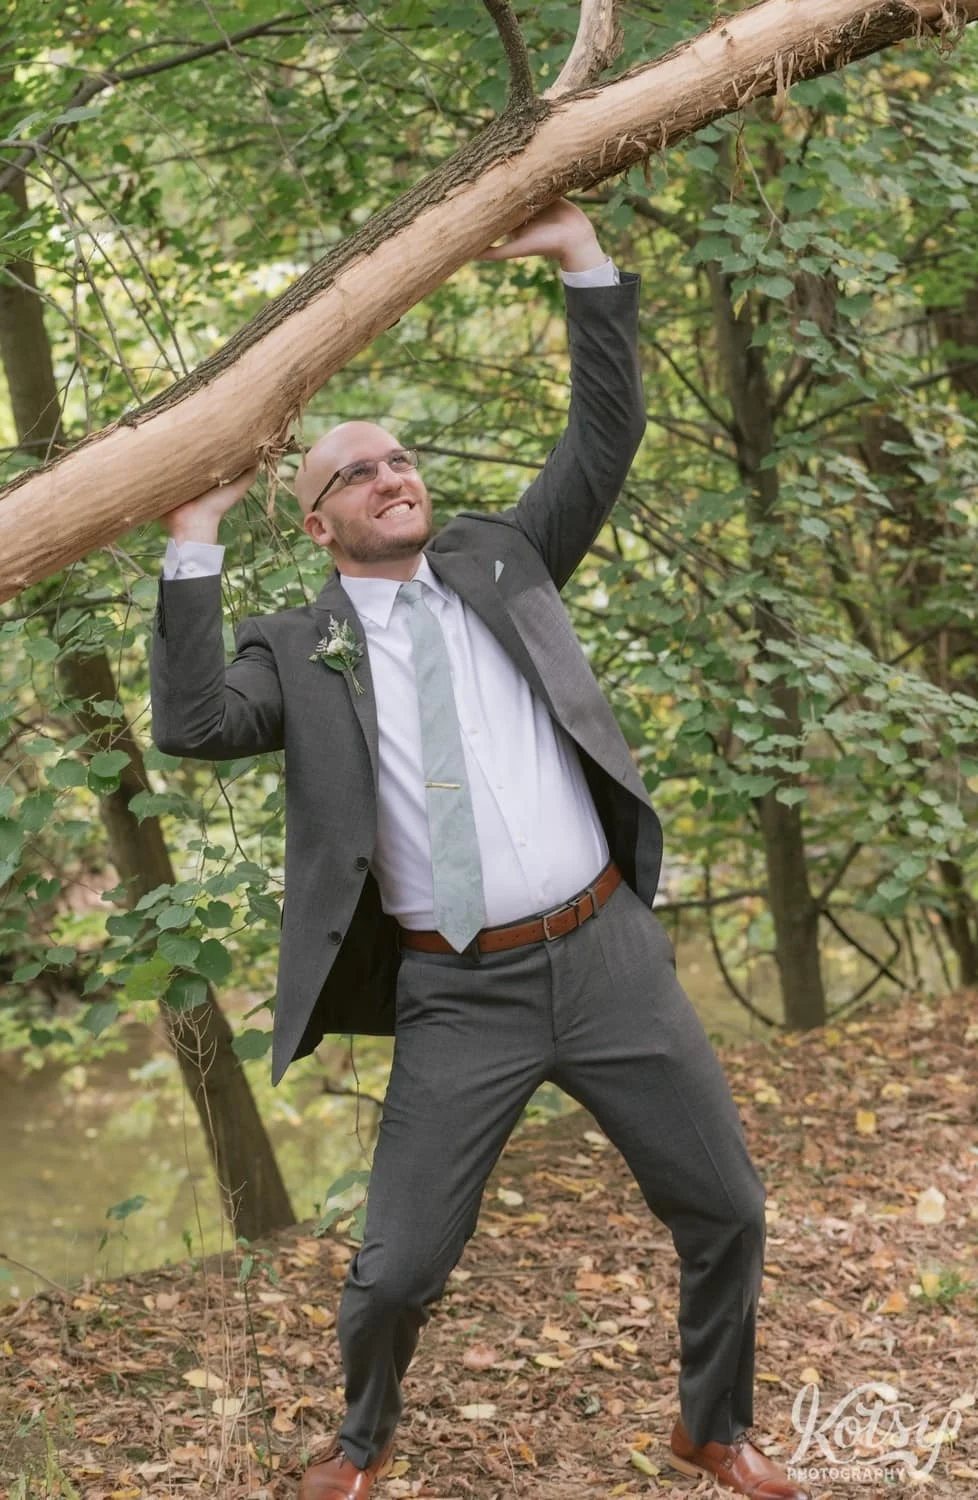 A groom wearing a white suit and green tie holds his hands up in the air pretending to push a large tree branch up at West Deane Park in Toronto, Canada